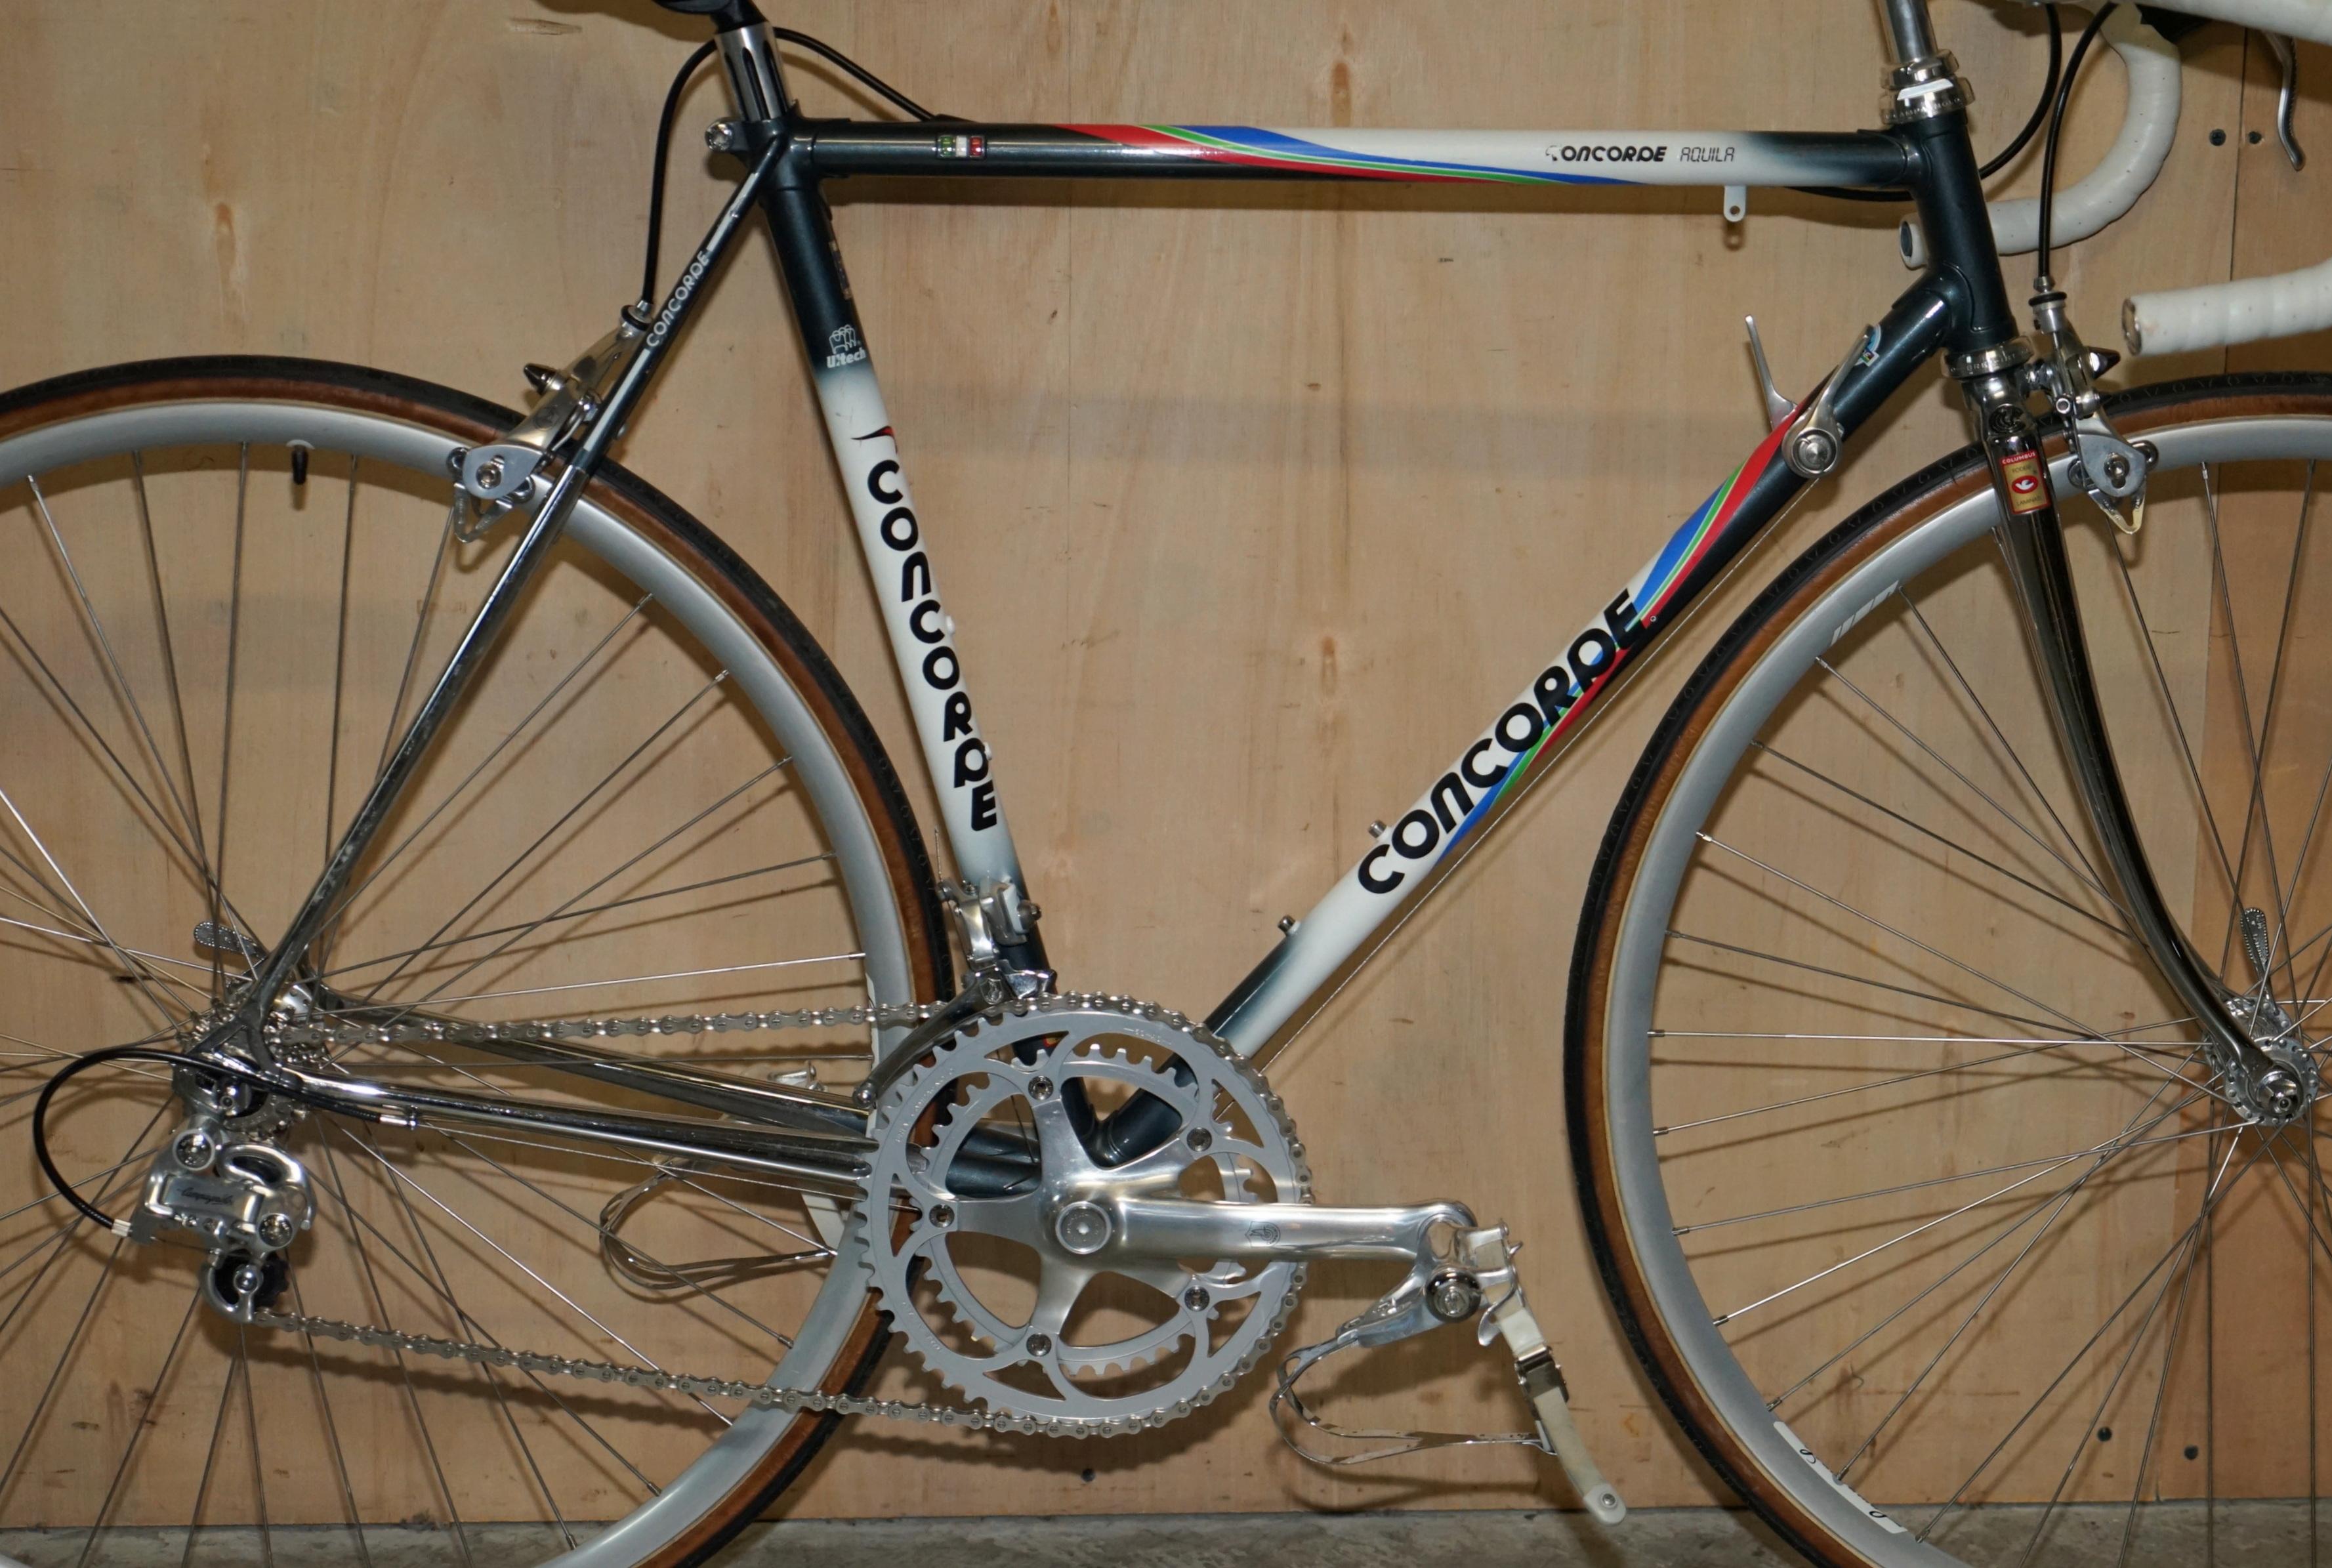 Royal House Antiques

Royal House Antiques is delighted to offer for sale this stunning Concorde Aquila World Champion 1990 54.5cm Road bike with full Campagnolo Chorus Groupset in exquisite condition throughout 

HISTORY

I am selling my entire